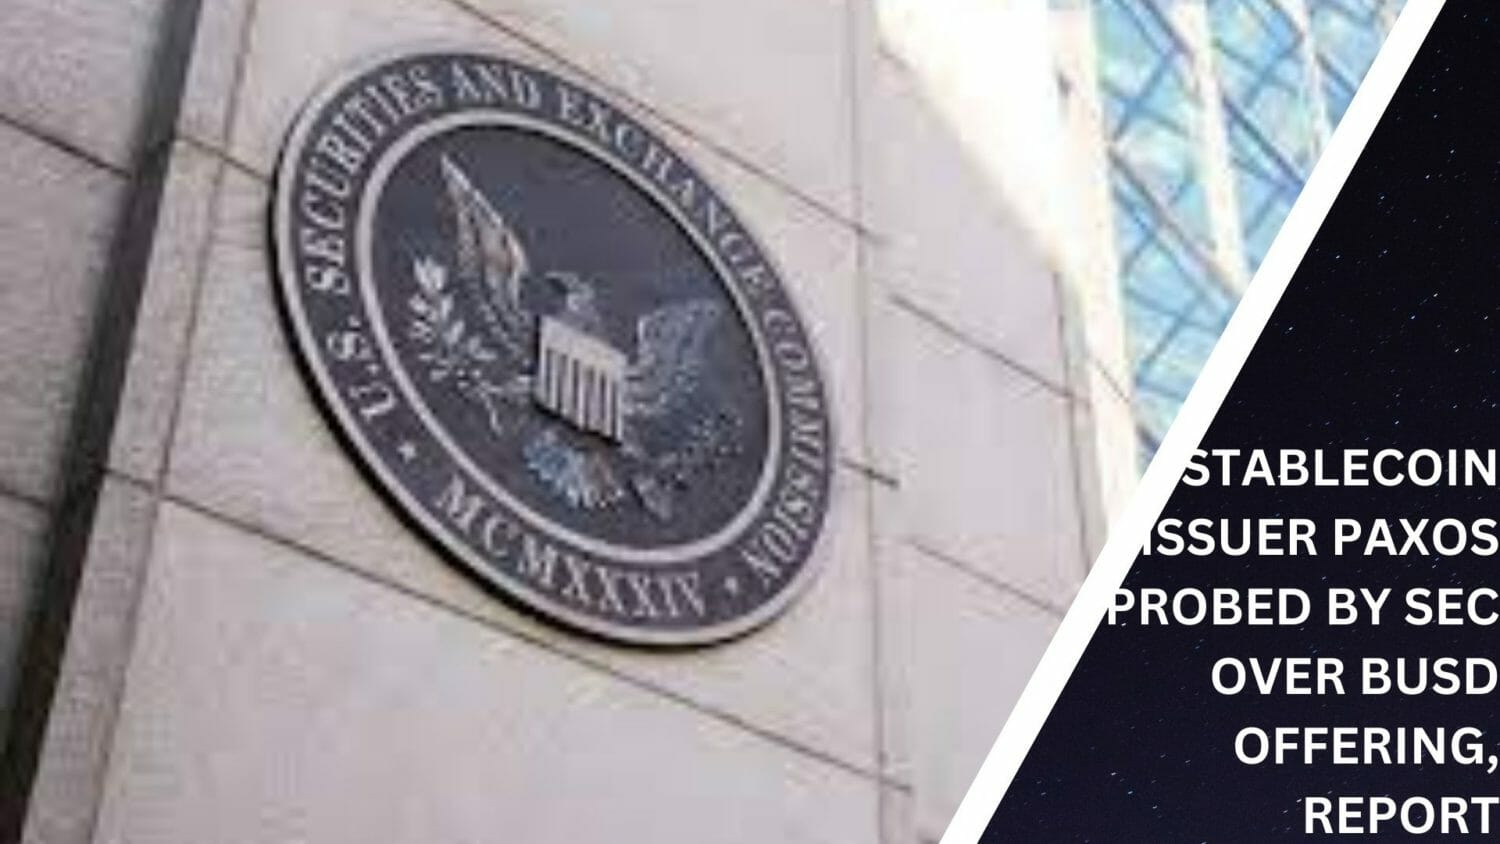 Stablecoin Issuer Paxos Probed By Sec Over Busd Offering, Report